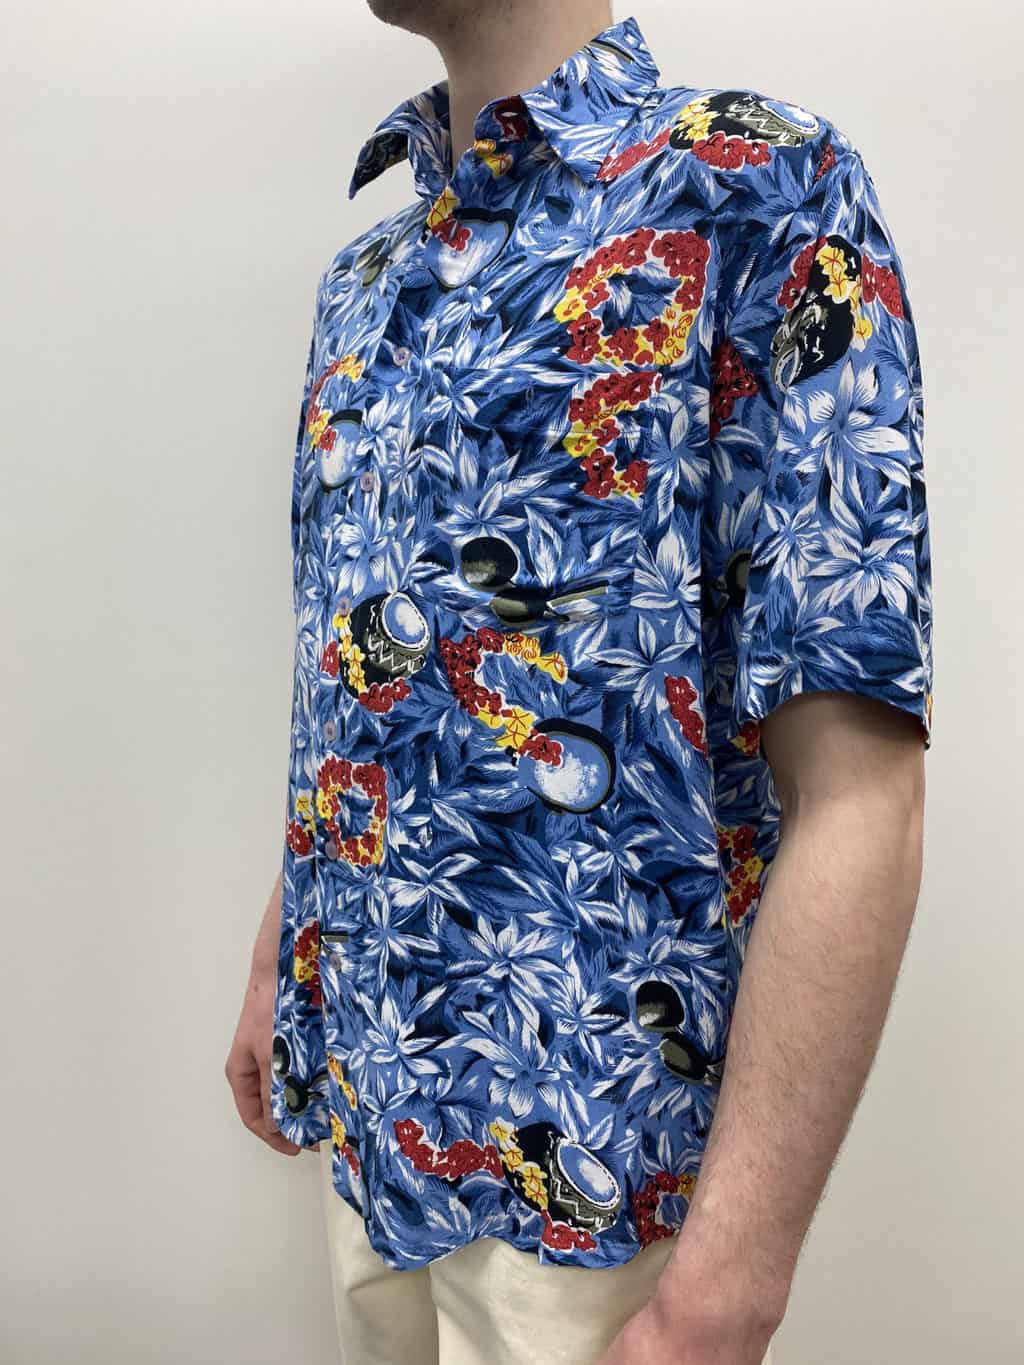 Mens vintage floral Hawaiian shirt with coconuts and lei garlands in blue  and red - Large - St Cyr Vintage